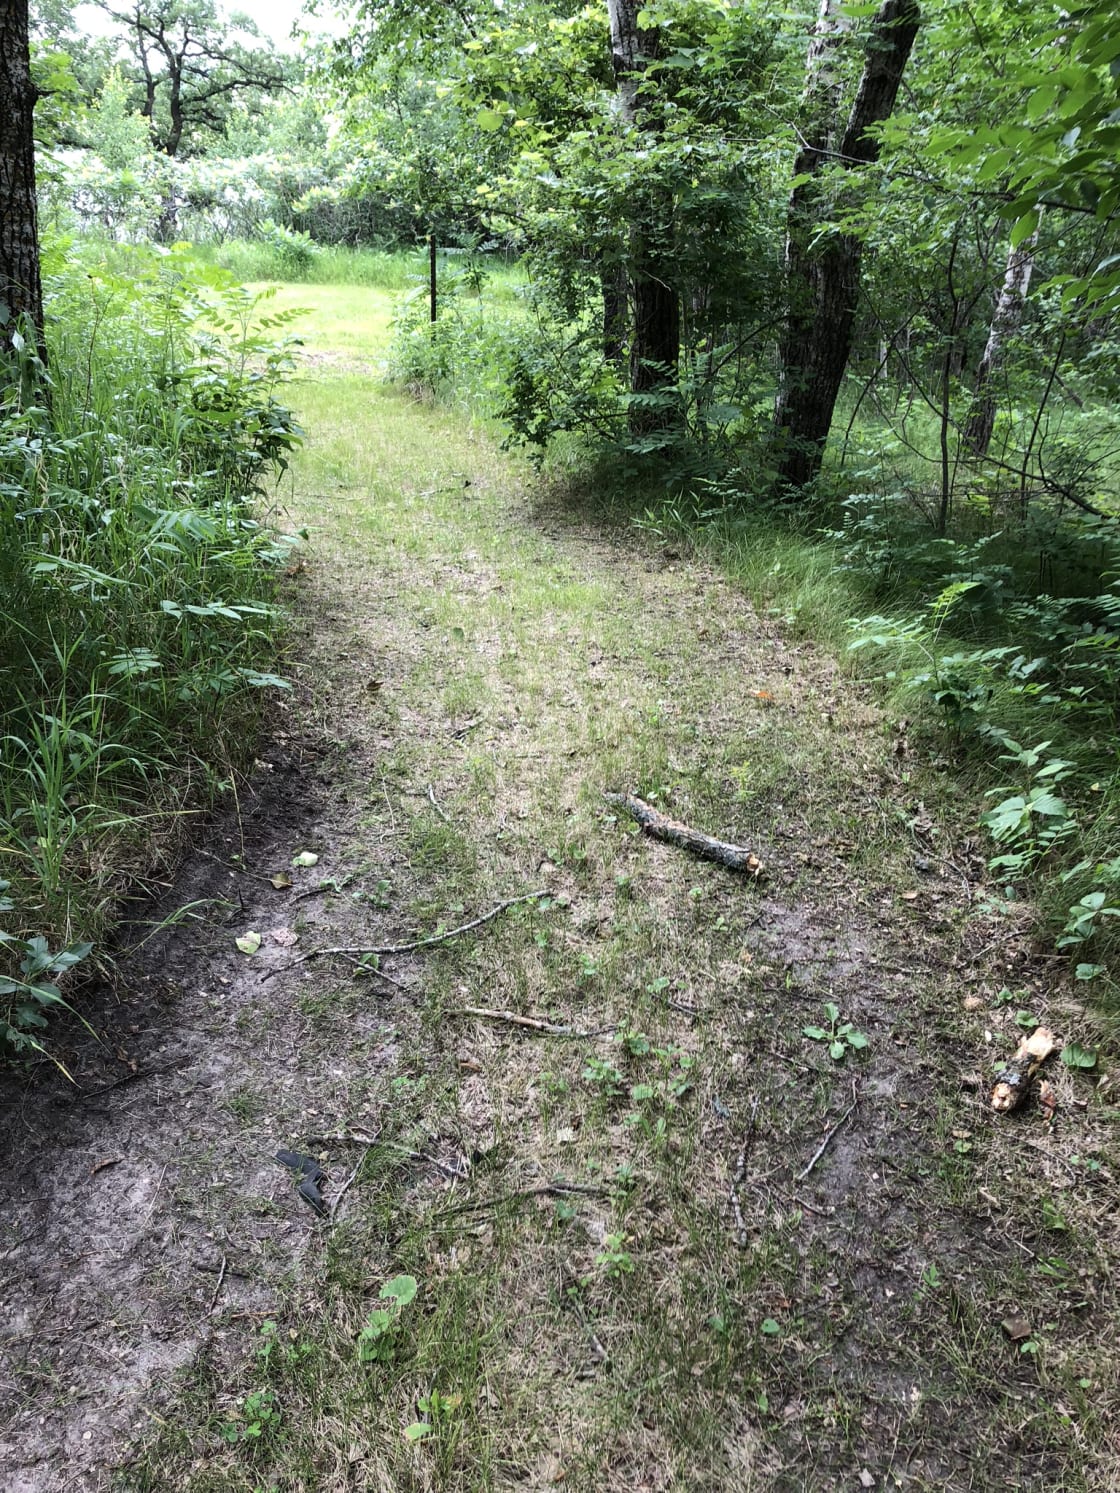 Path to the most rustic camping spot in the woods. Very private but the ground is at a slope and you are surrounded by mosquitoes! This spot is for the wild and brave ones! ;)